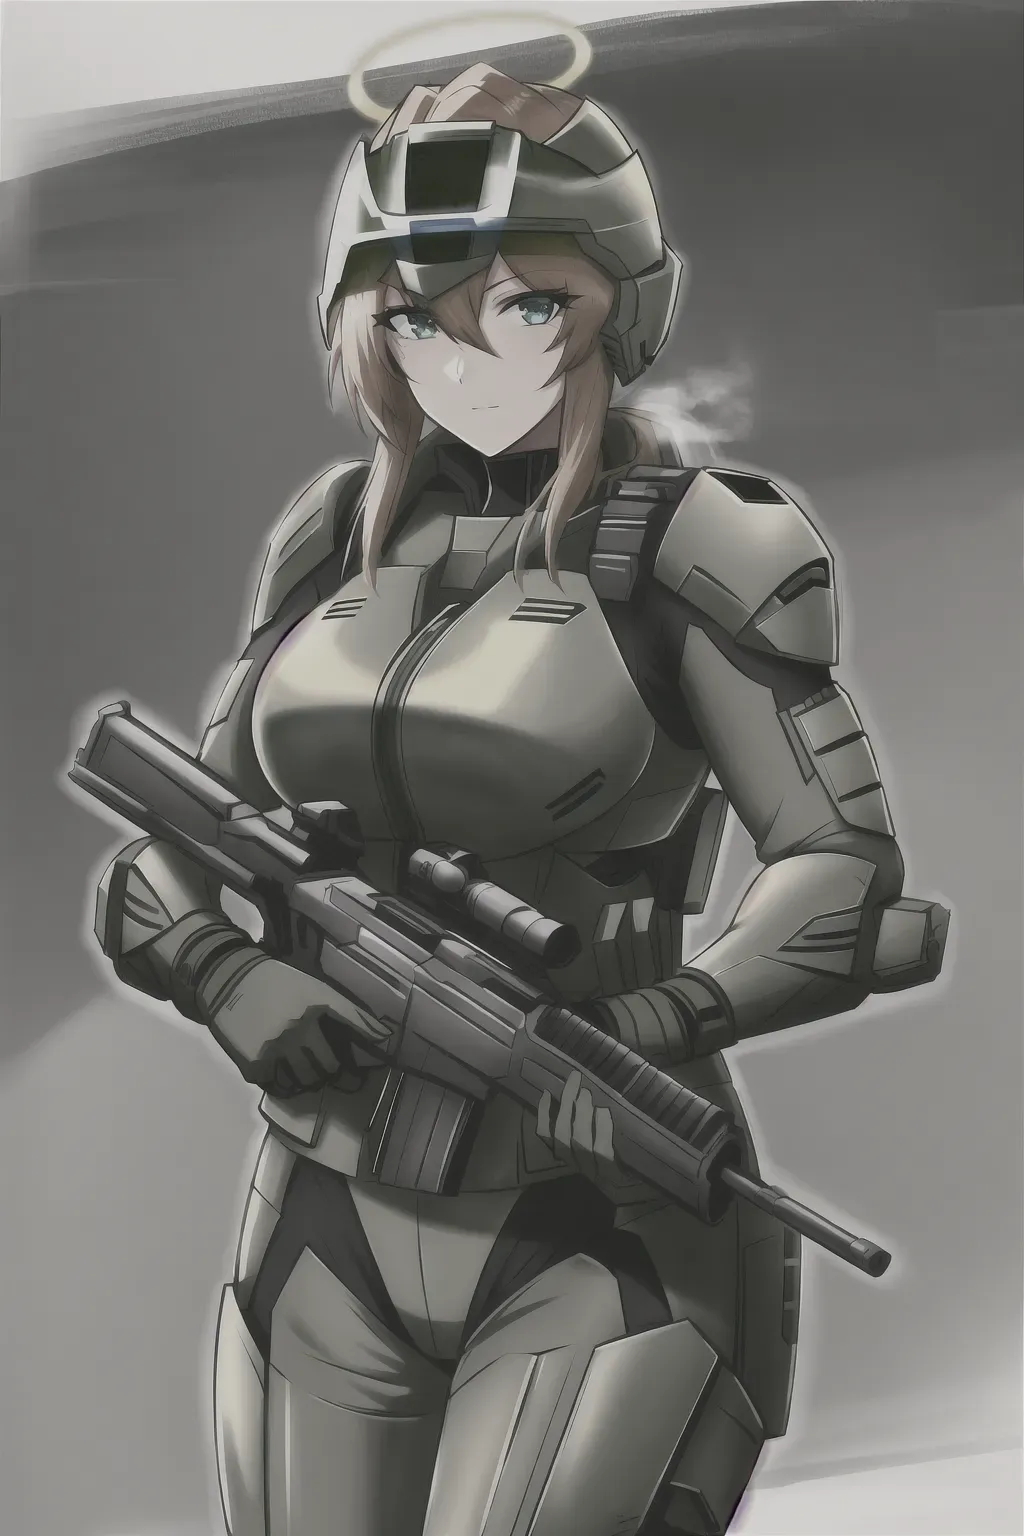 Steam Műhely::Tactical Operator Anime Girl - Animated Wallpaper